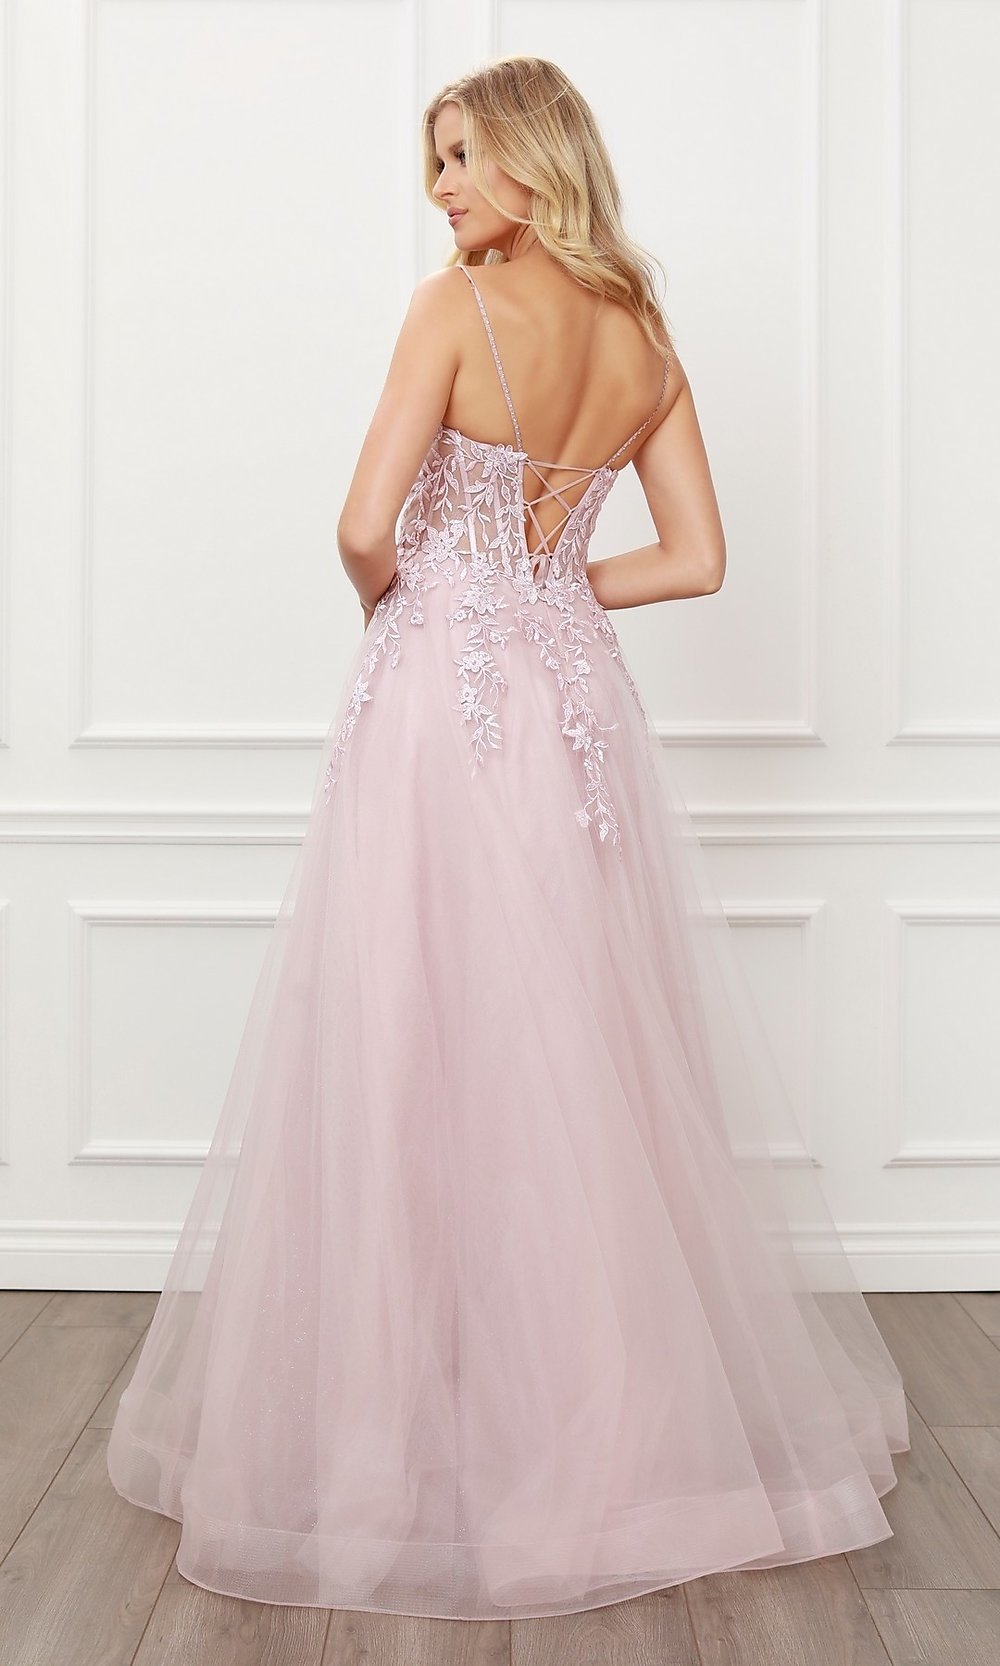 Buy Pink Chick Lilac Princess Ball Gown online